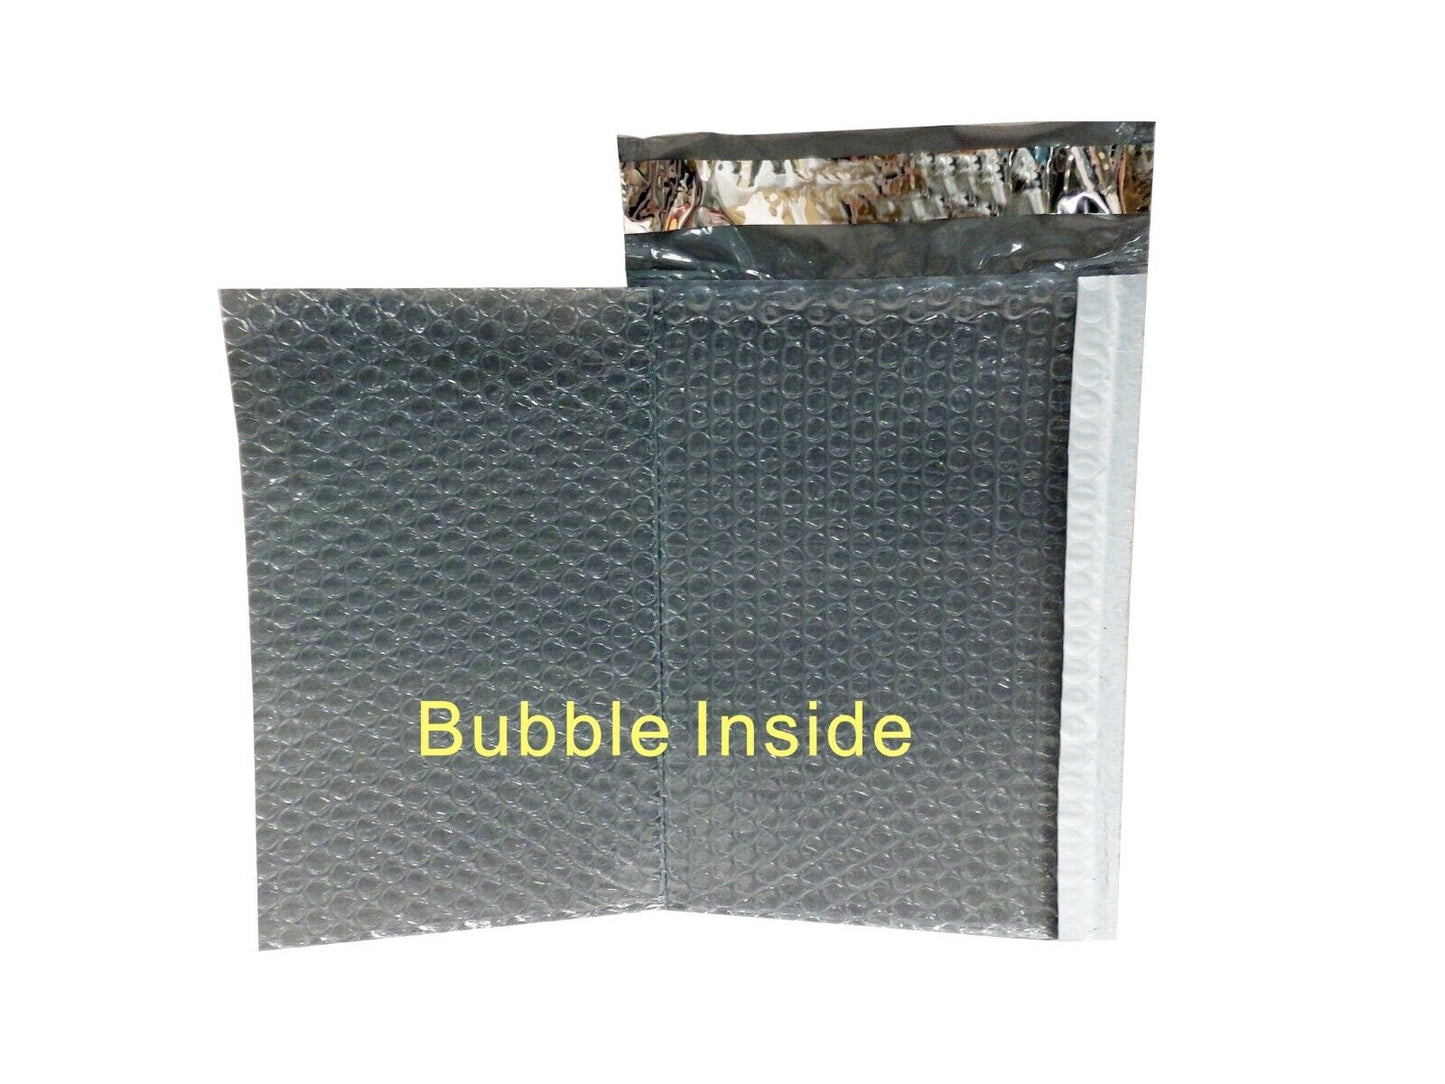 PolycyberUSA  500 pcs #000 Poly Bubble Envelopes Mailers  (Inner 4x7)